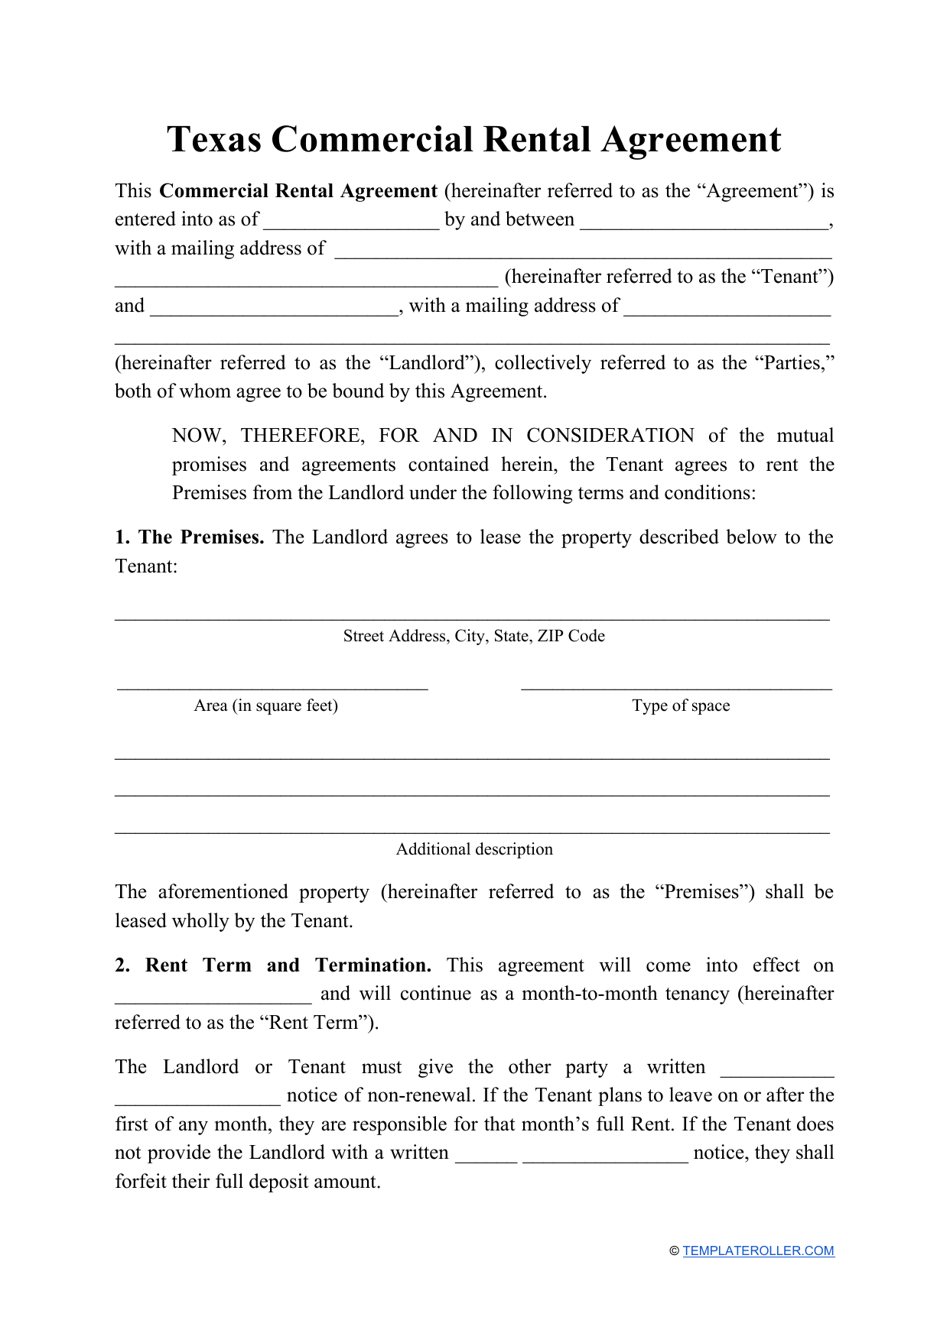 Commercial Rental Agreement Template - Texas, Page 1